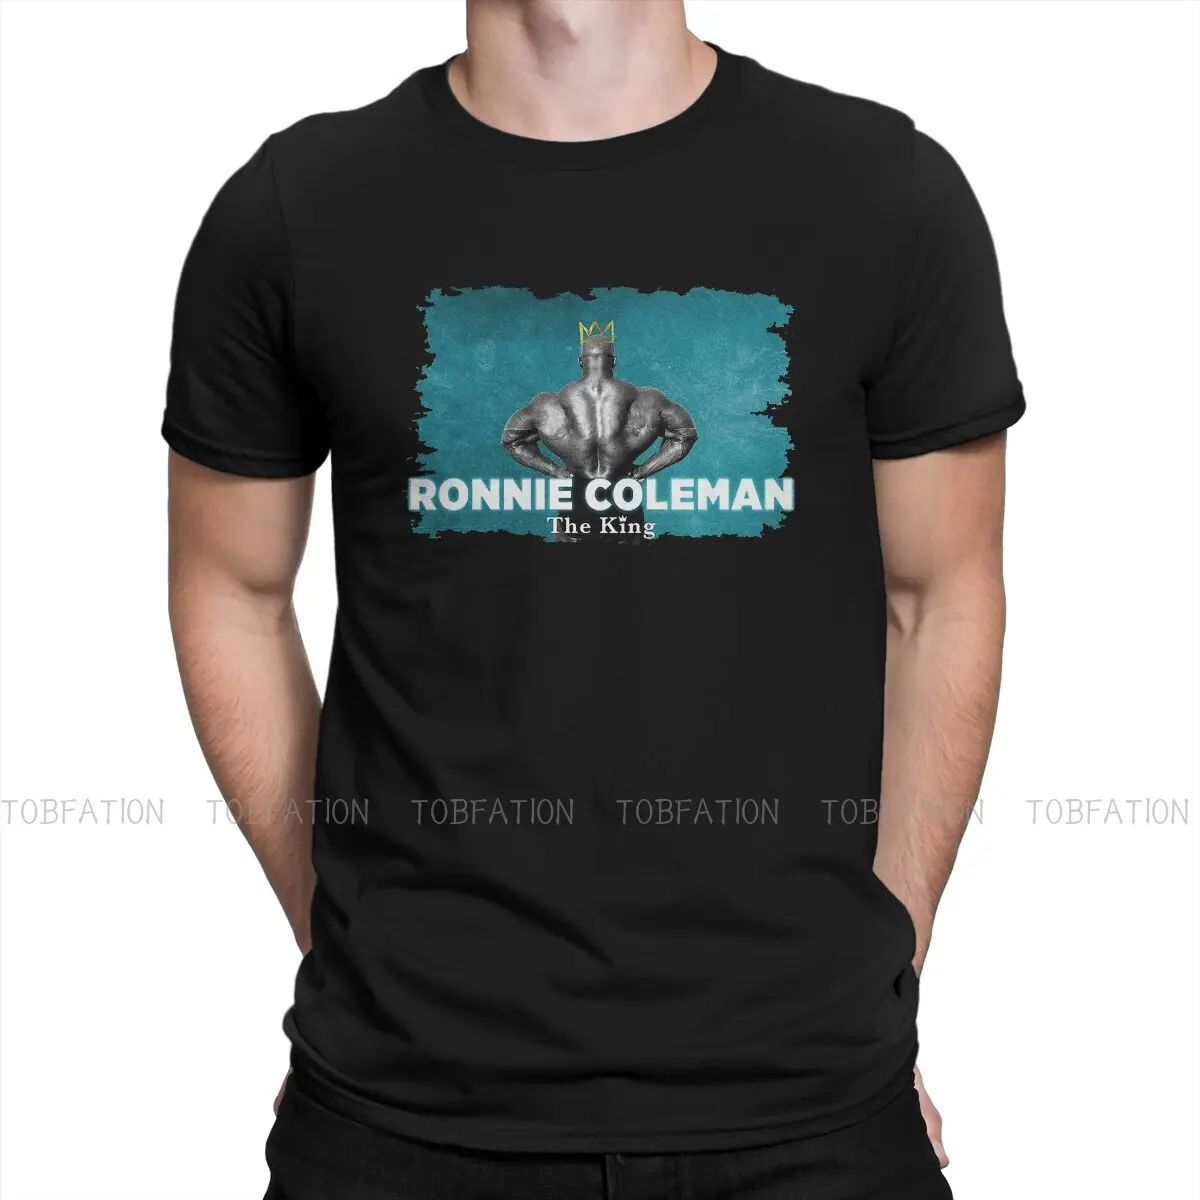 

Ronnie Coleman Fit Exercise Original TShirts The King Blue Distinctive Homme T Shirt Funny Clothing 6XL